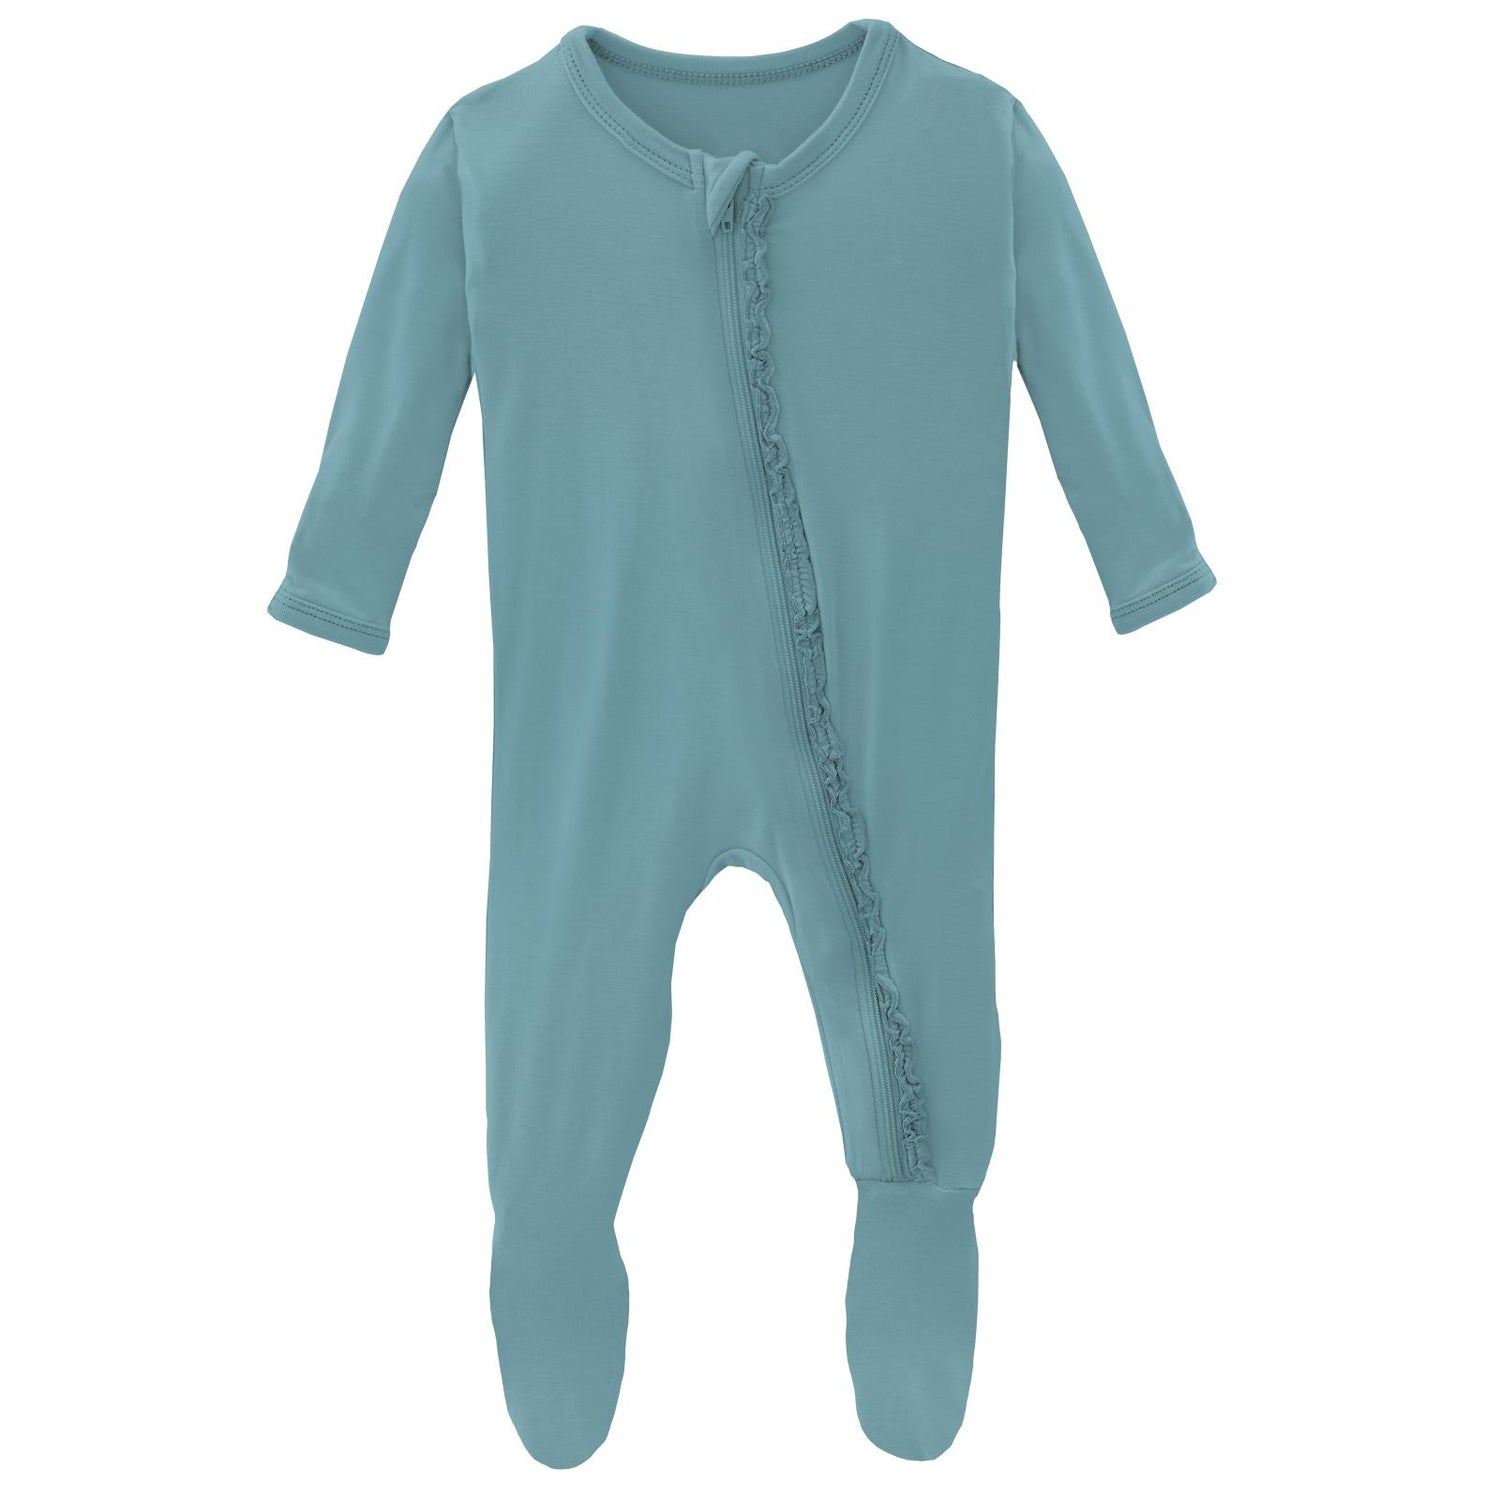 Muffin Ruffle Footie with Zipper in Glacier